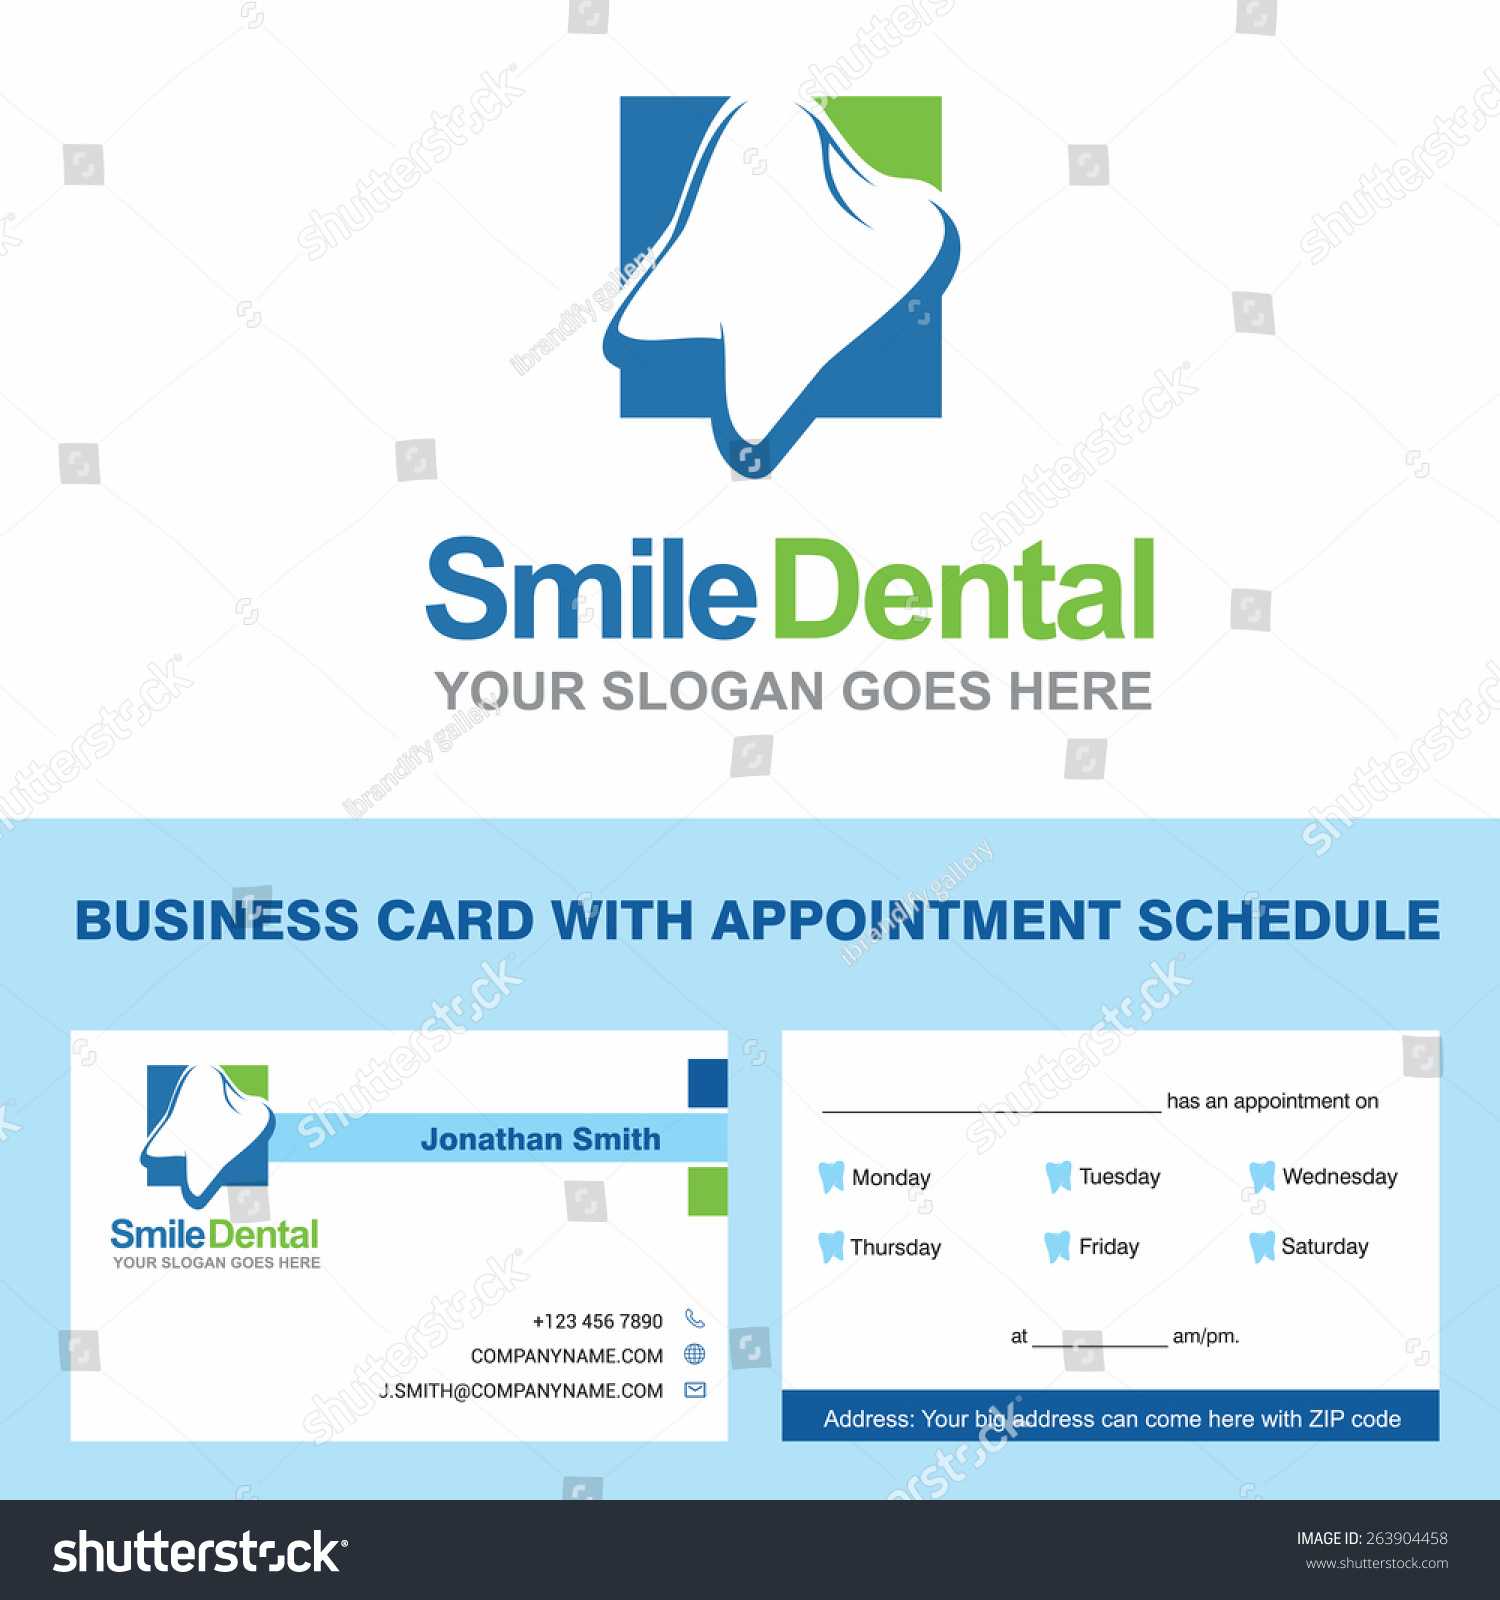 Abstract Vector Smile Dental Identity Concept Stock Vector Inside Dentist Appointment Card Template